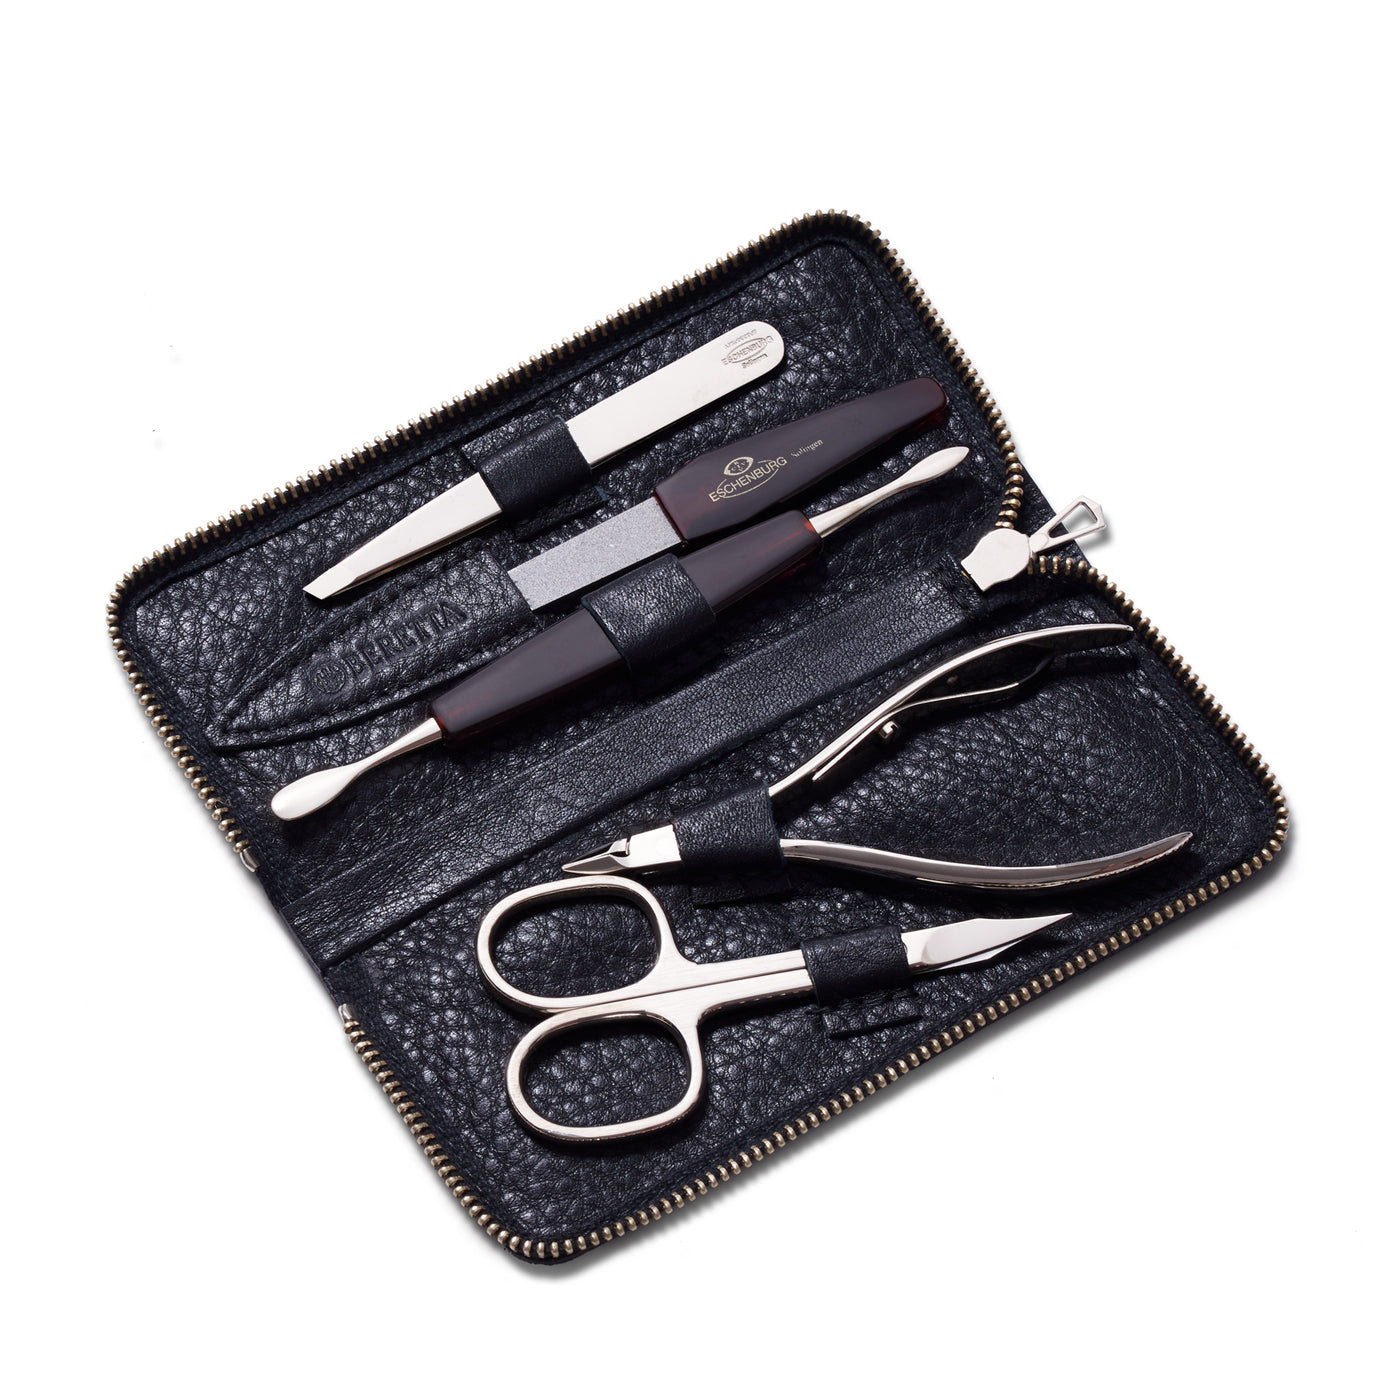 Nickleplated Personal Grooming Set with Leather Travel Holder - Black